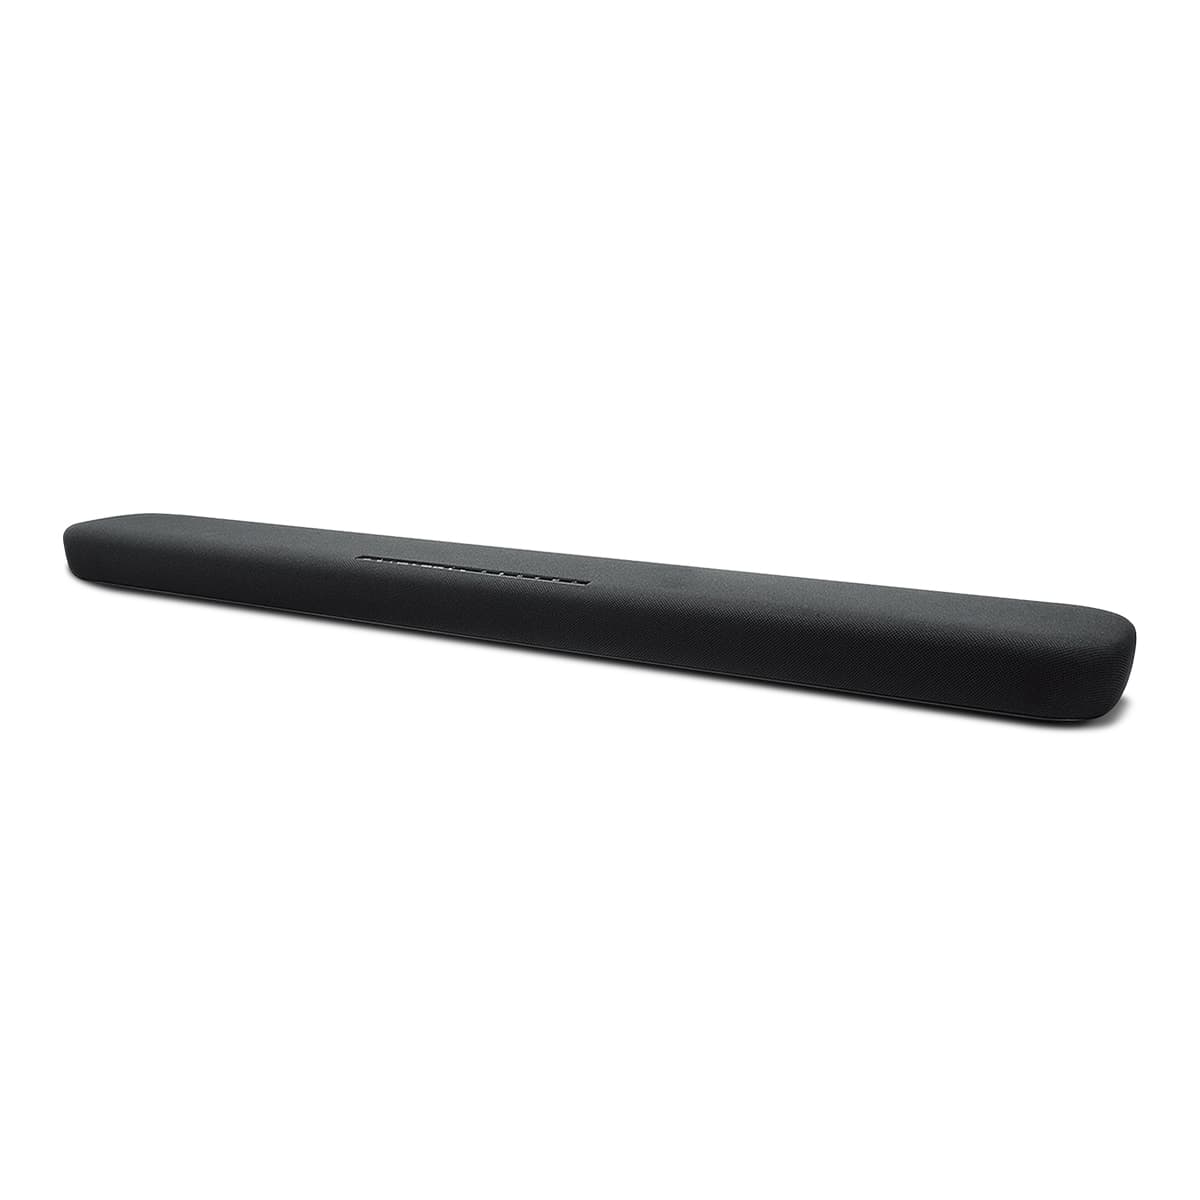 Yamaha Yas-109 Sound Bar with Built-in Subwoofers, Bluetooth - image 2 of 10